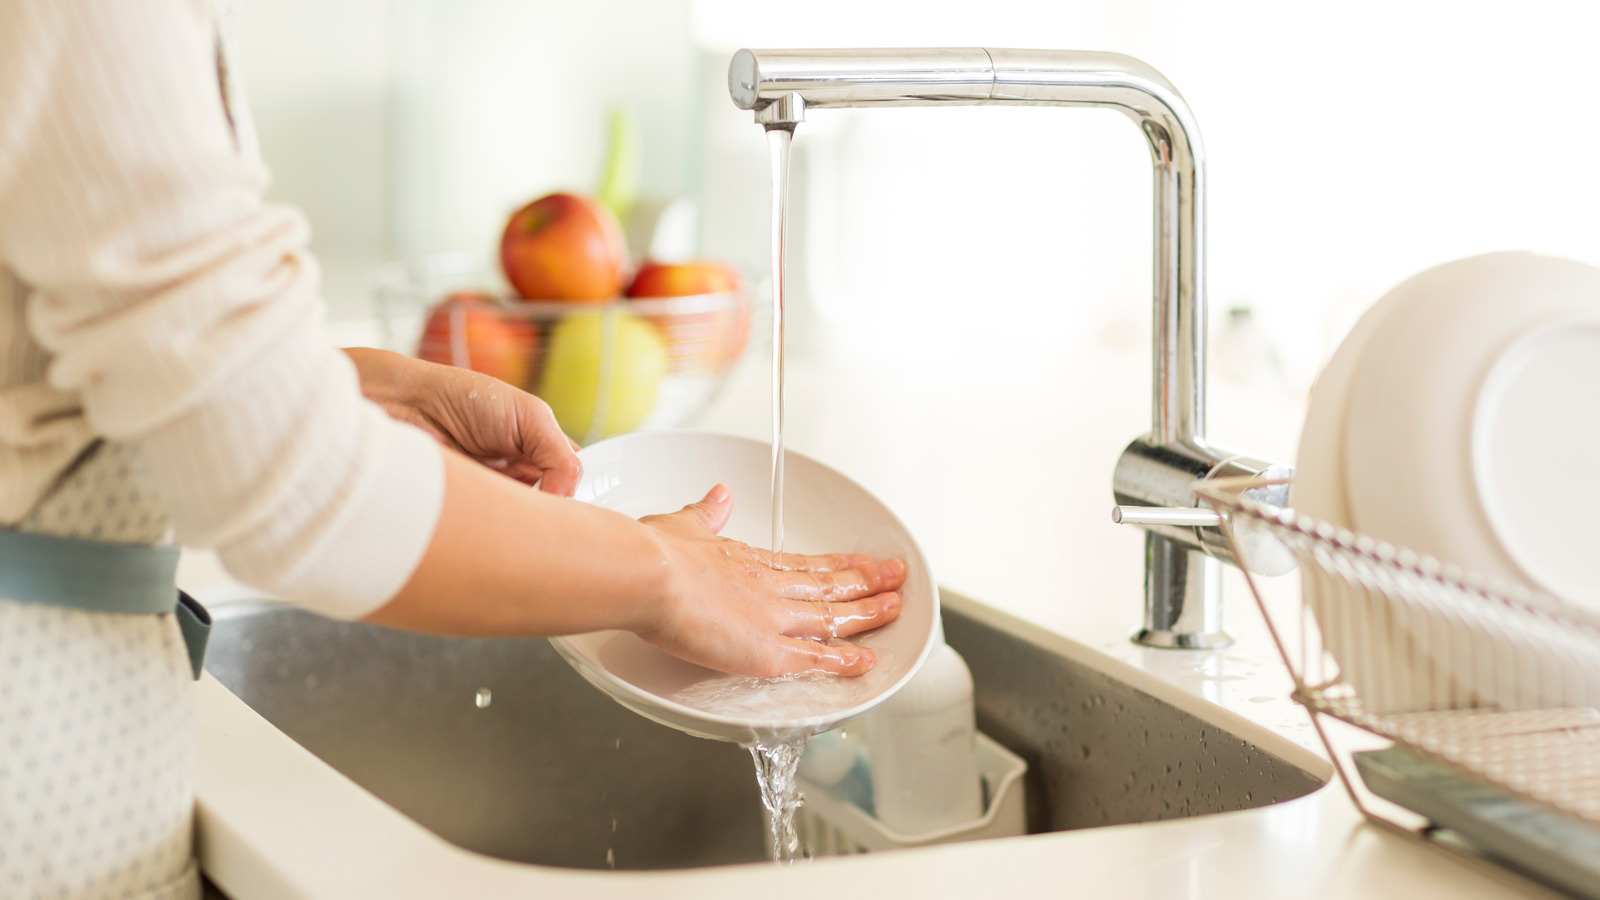 Do You Need To Wash Your Hands After Washing The Dishes?